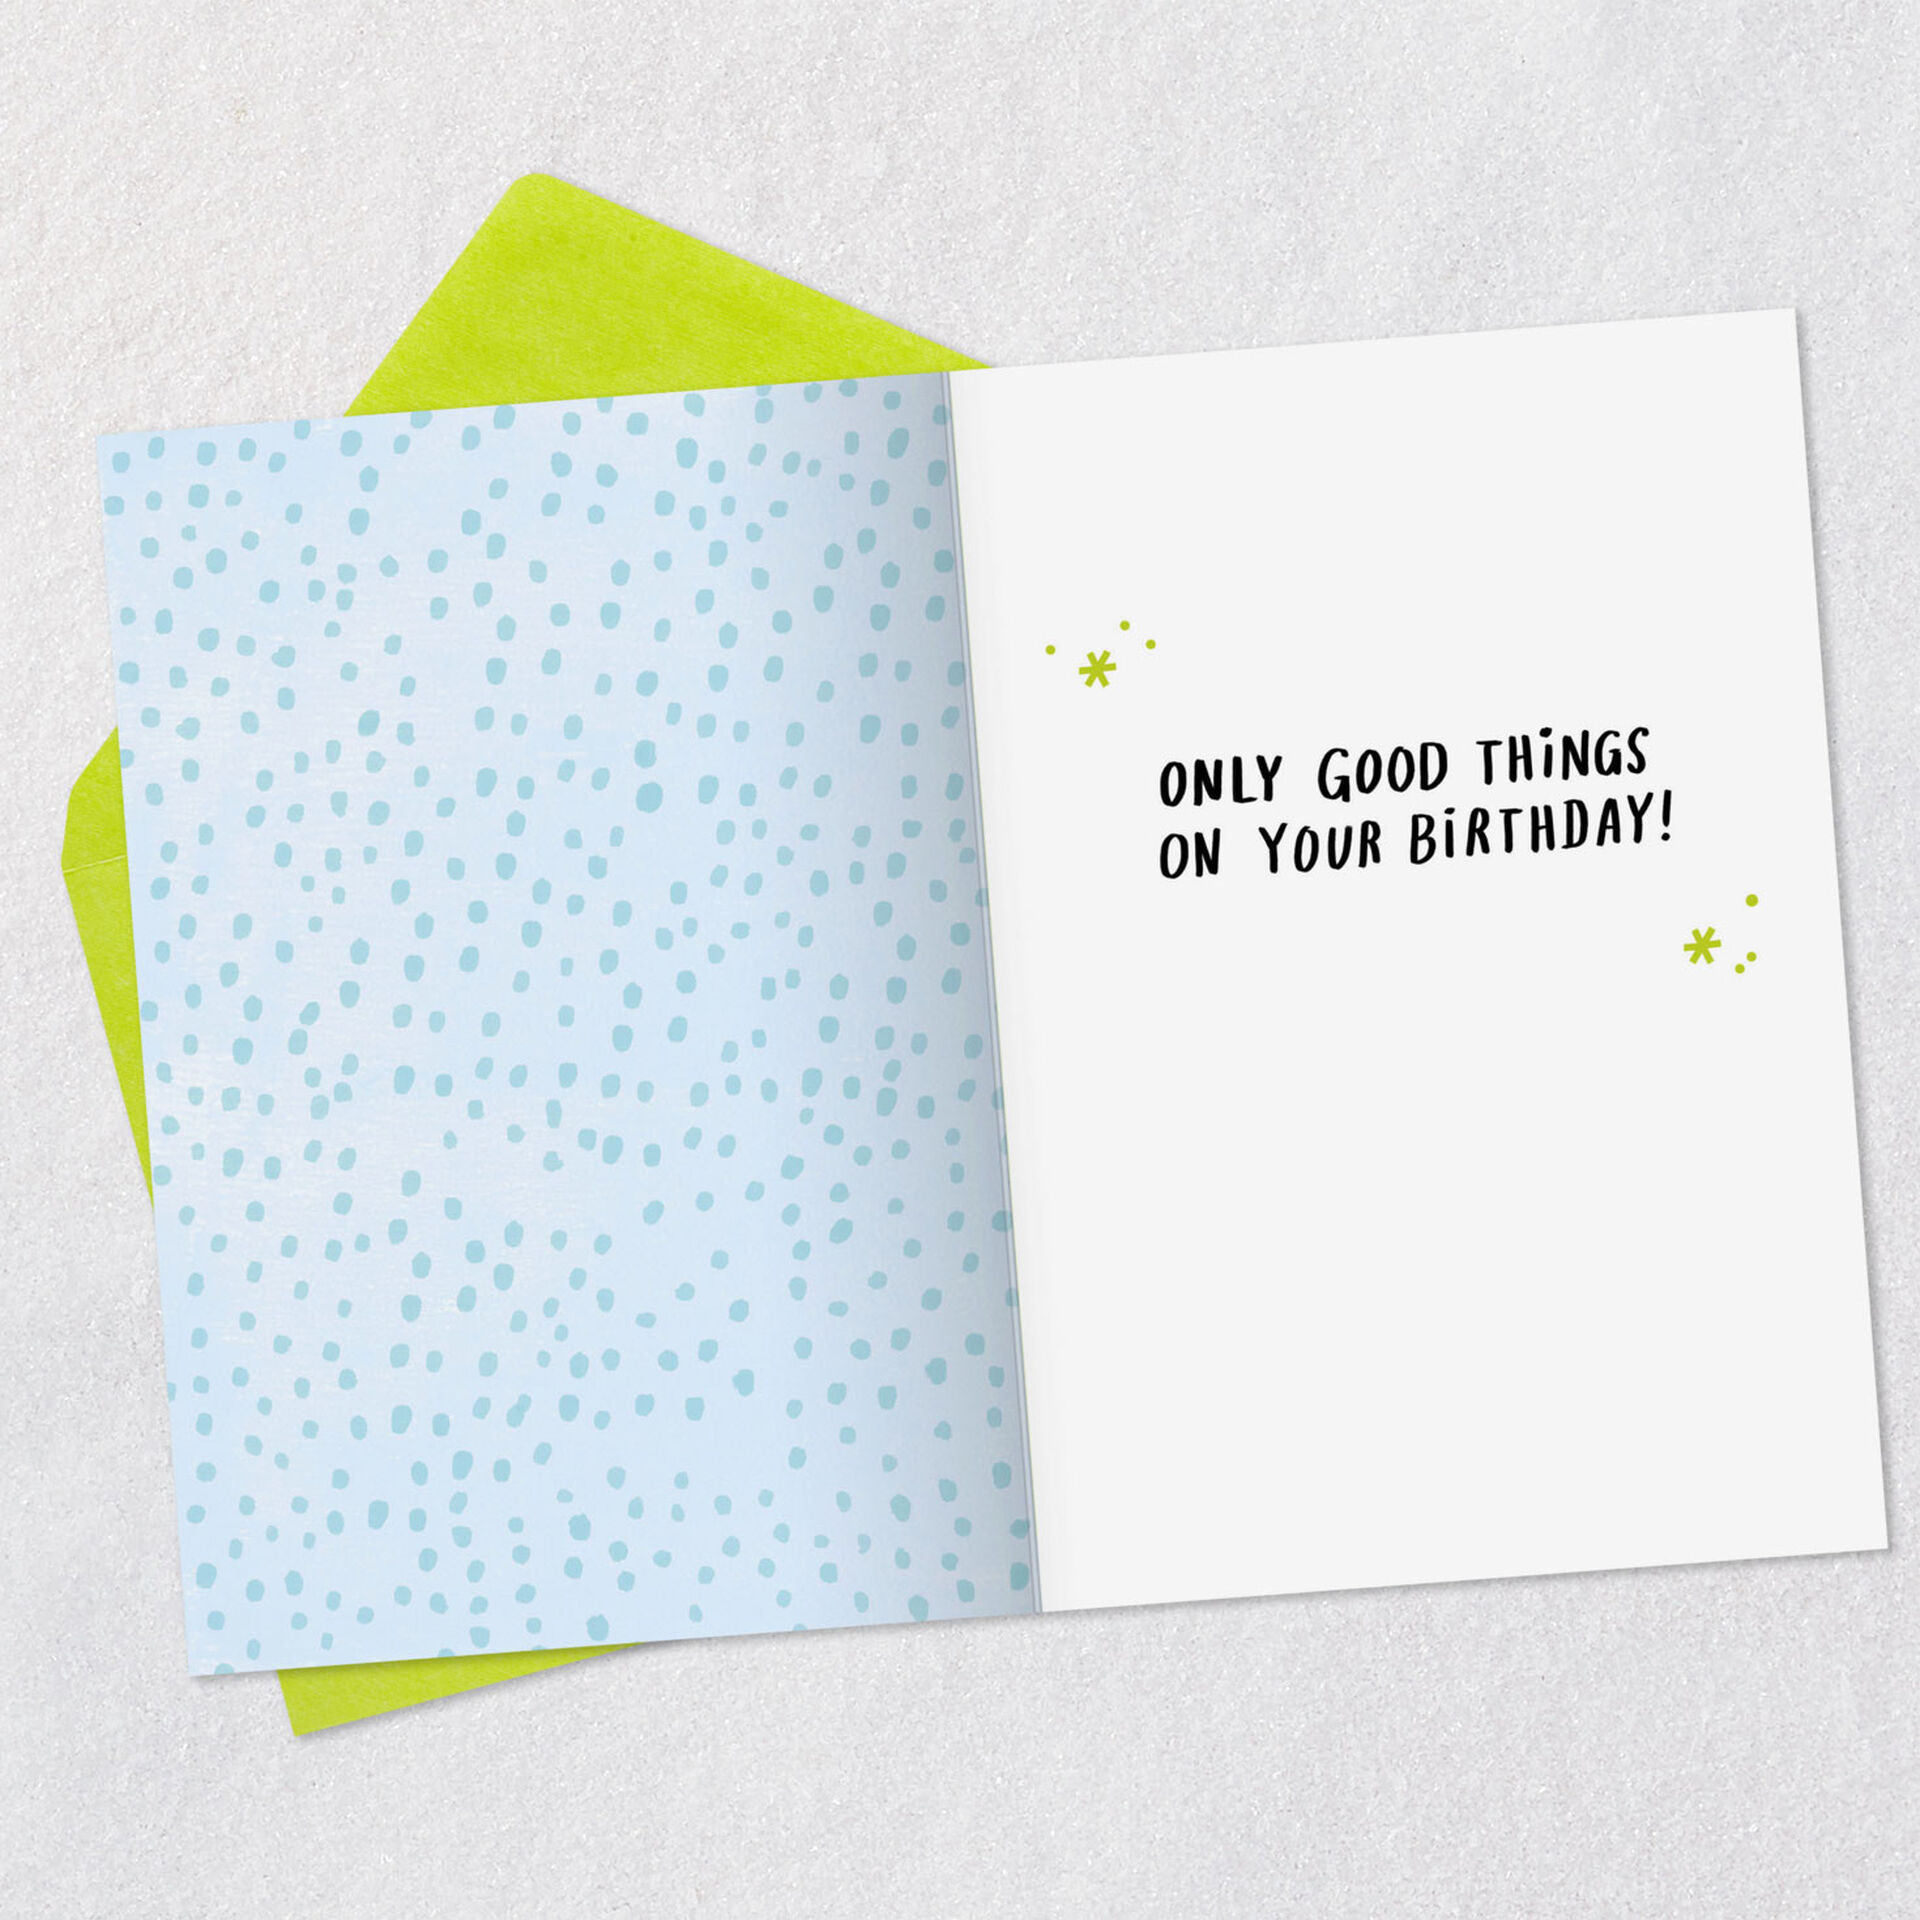 List-of-Things-to-Avoid-Funny-Birthday-Card_399ZZB9865_03